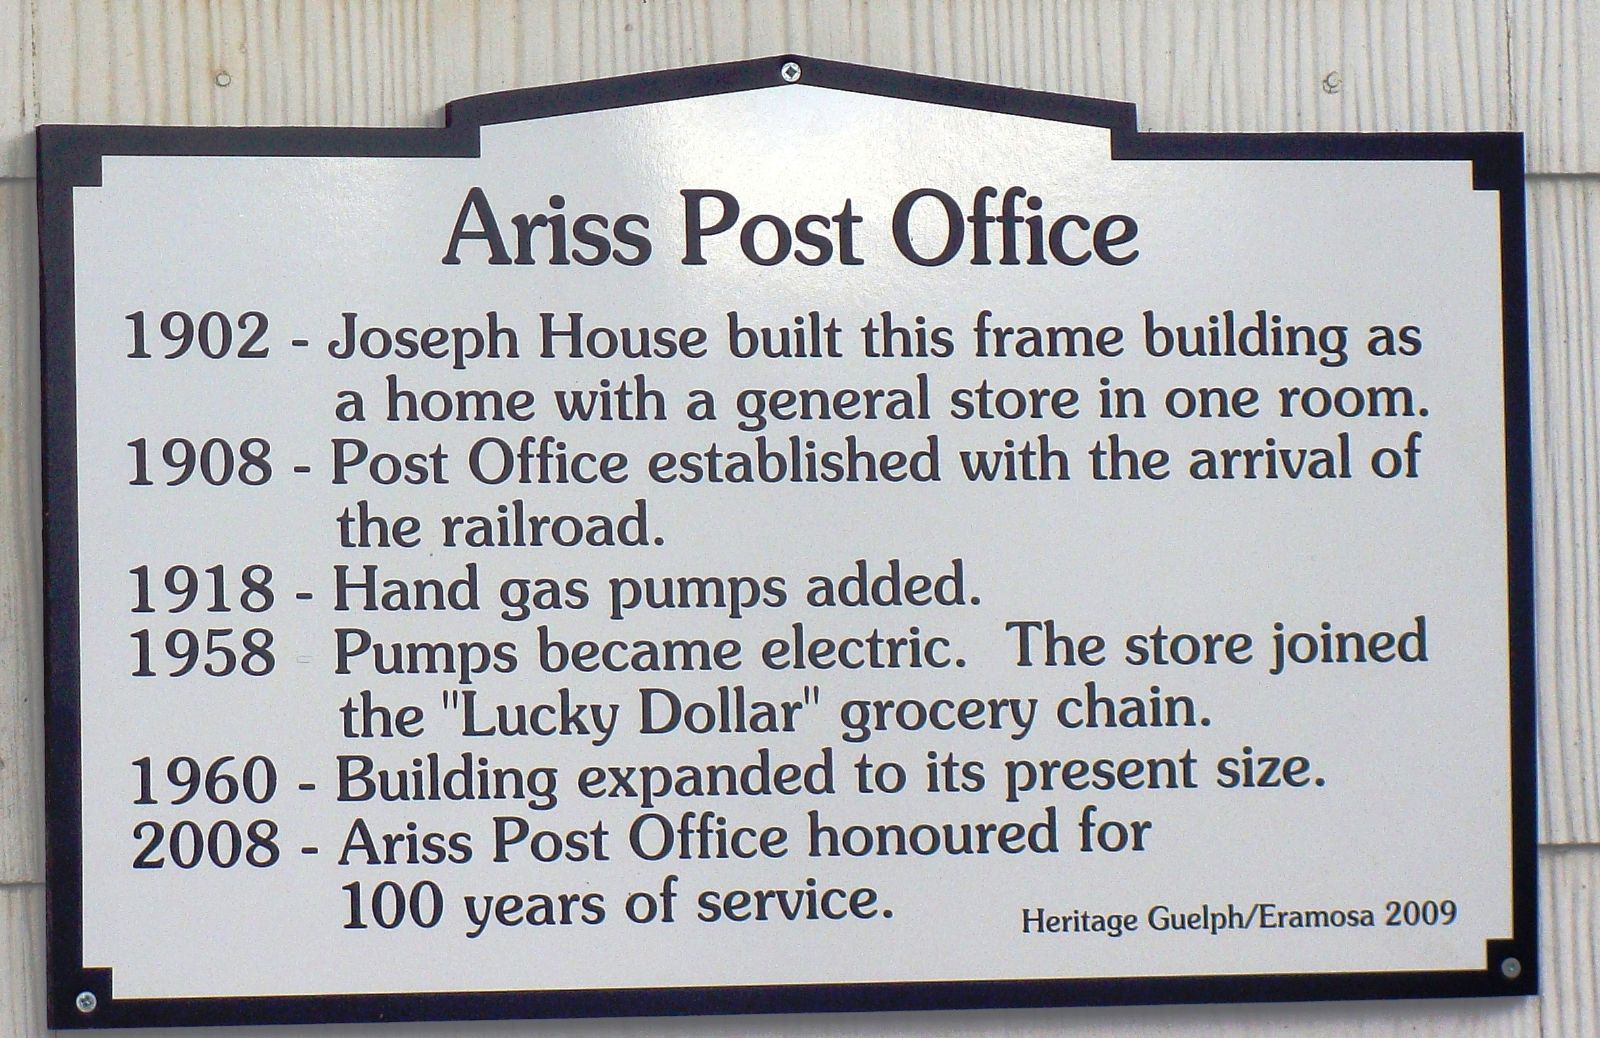 Photo of a Heritage Pride Plaque for the Ariss Post Office